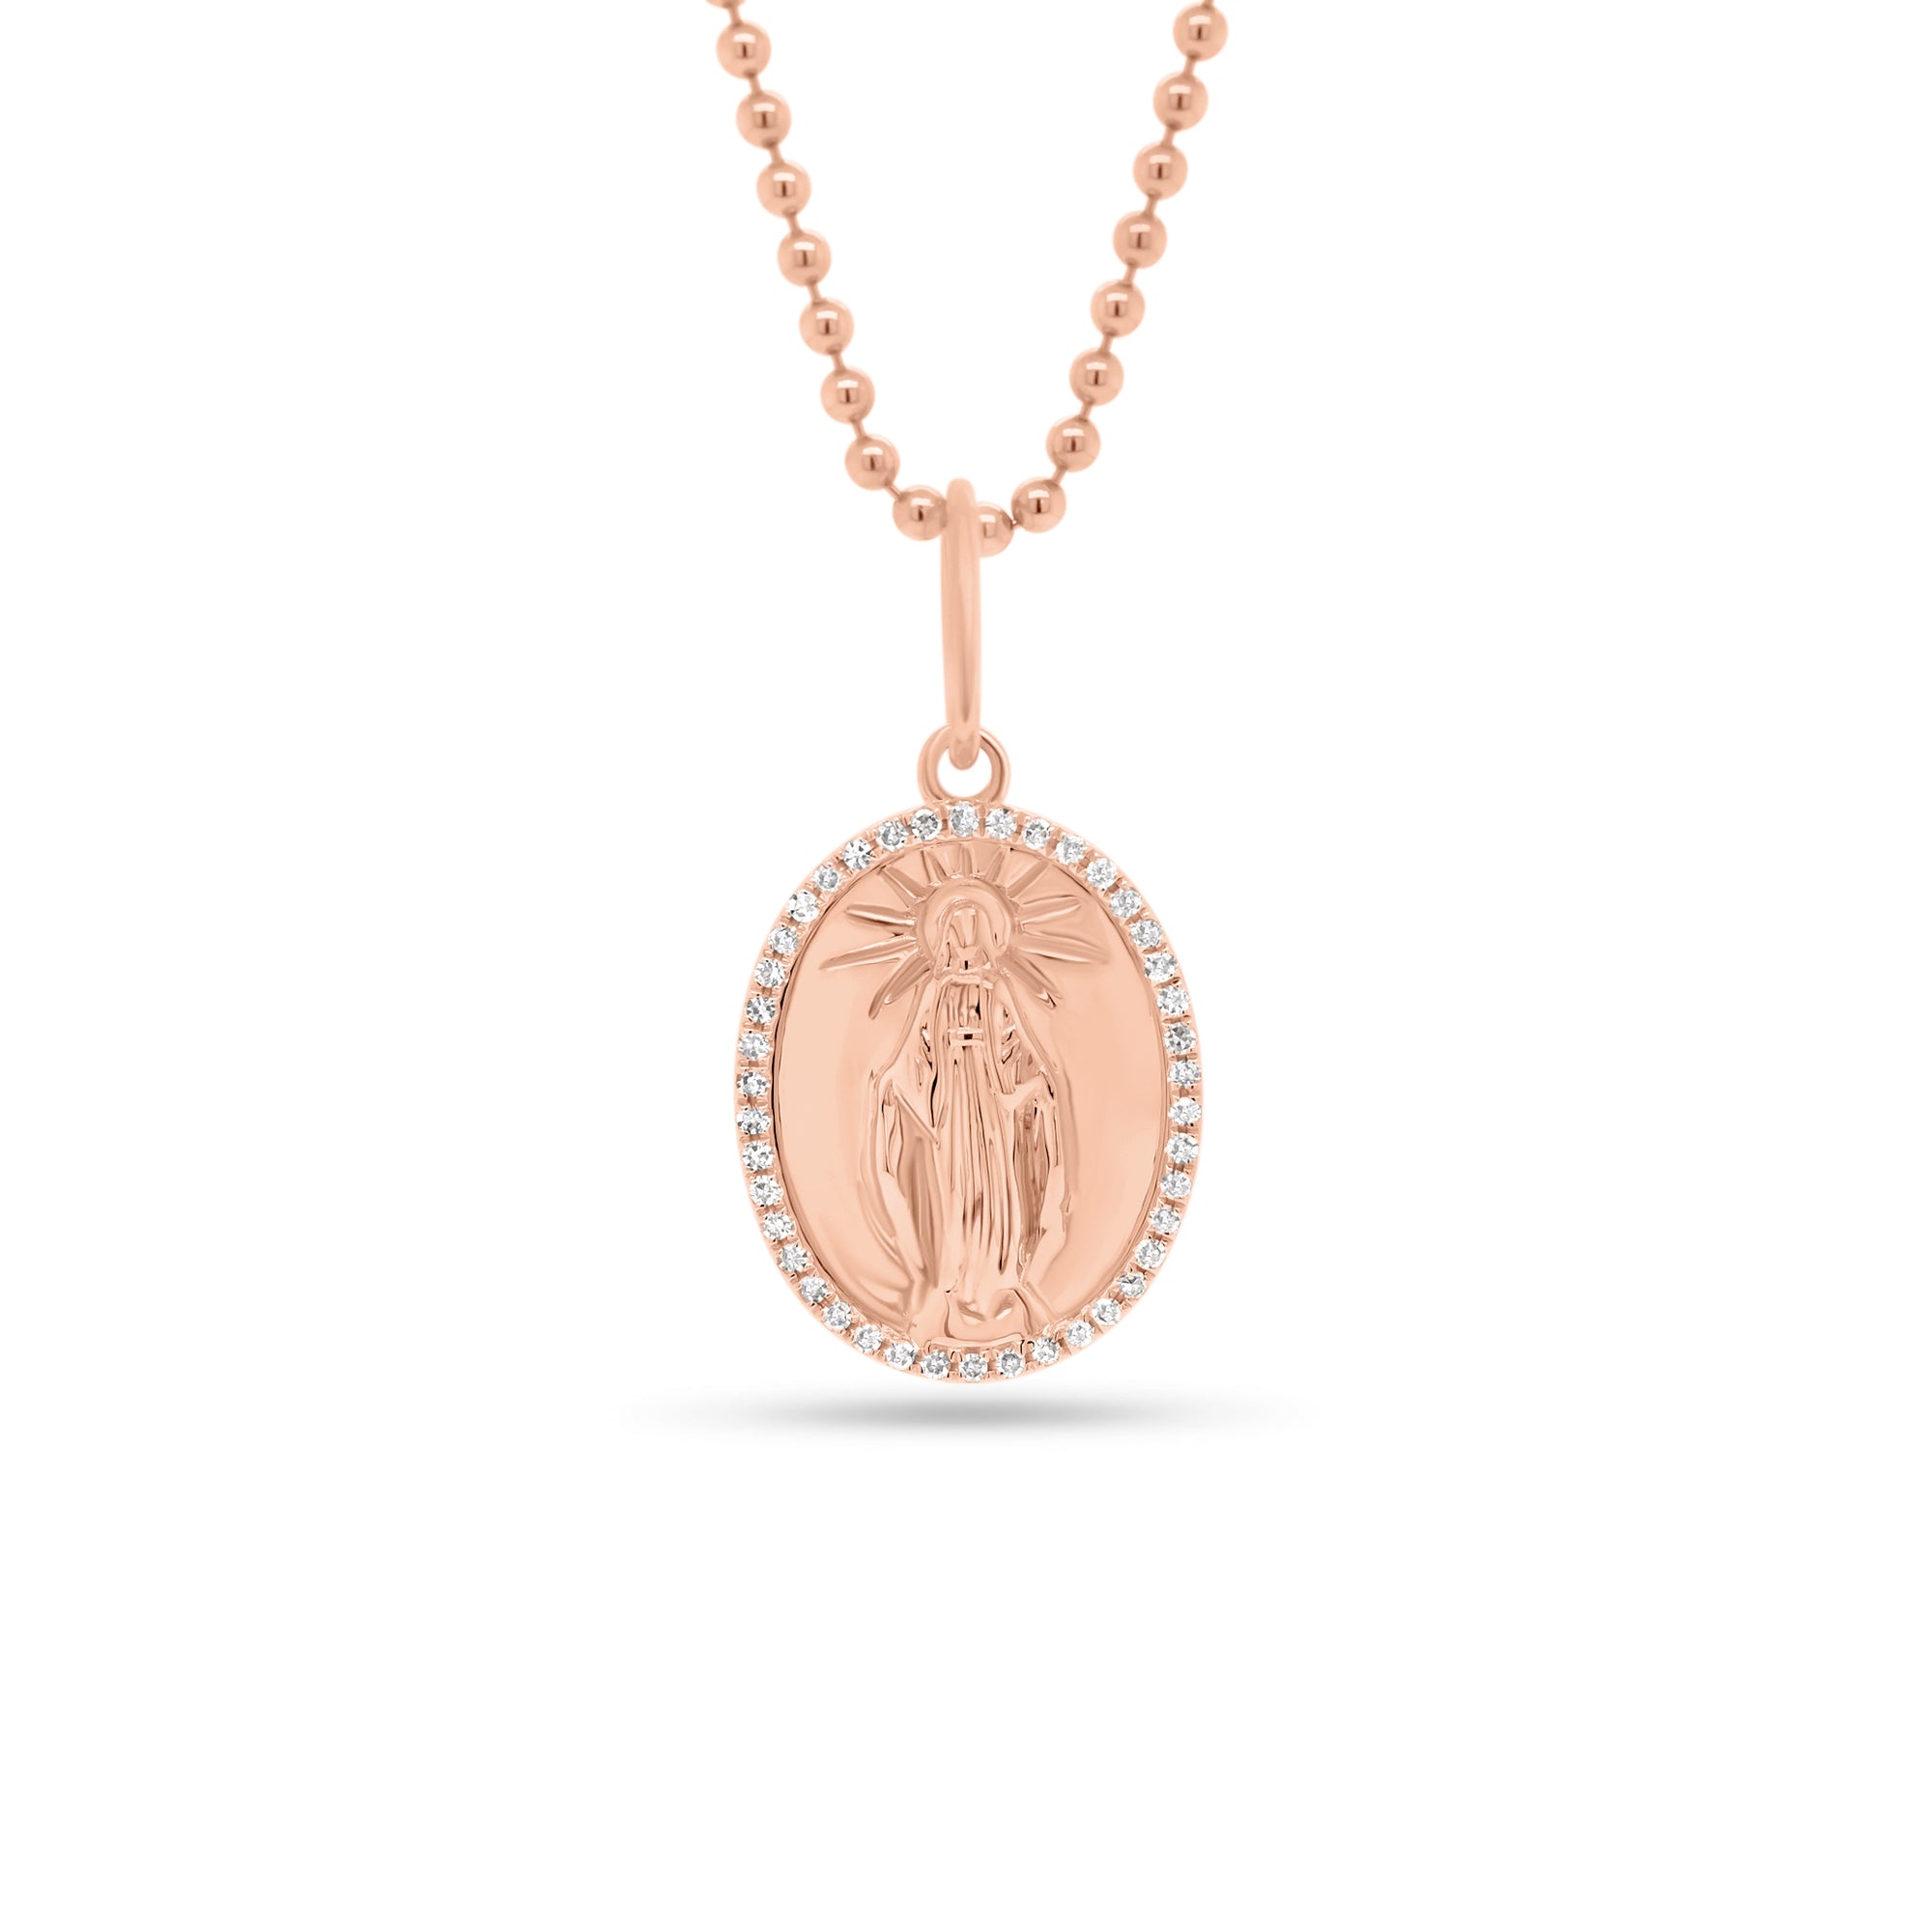 Diamond Mother Mary Pendant - 14K yellow gold weighing 1.75 grams - 42 round diamonds totaling 0.11 carats